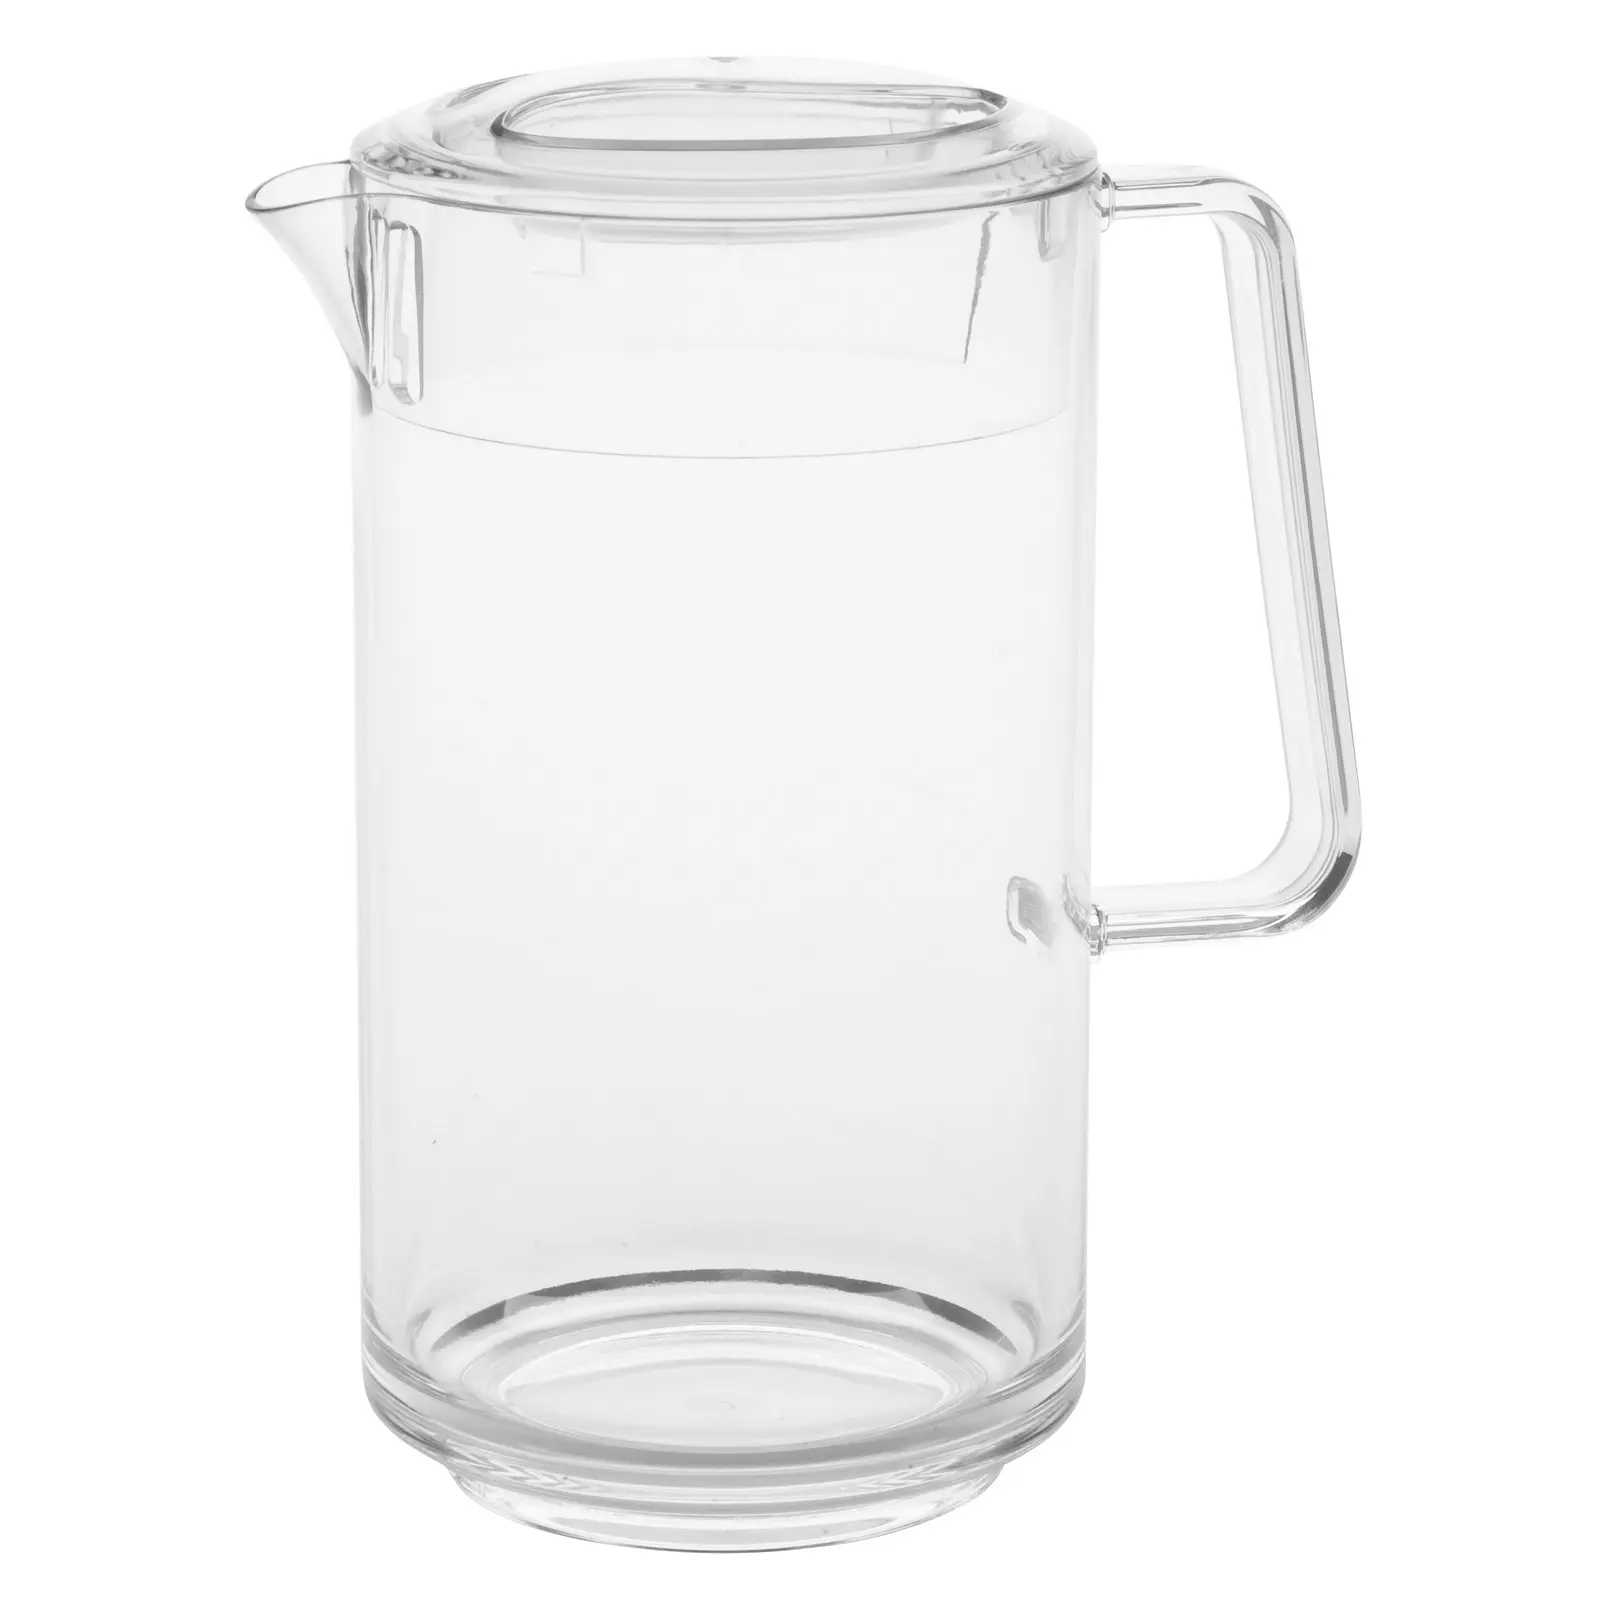 Big Polycarbonate Plastic Beer Pitcher Cup And Jar